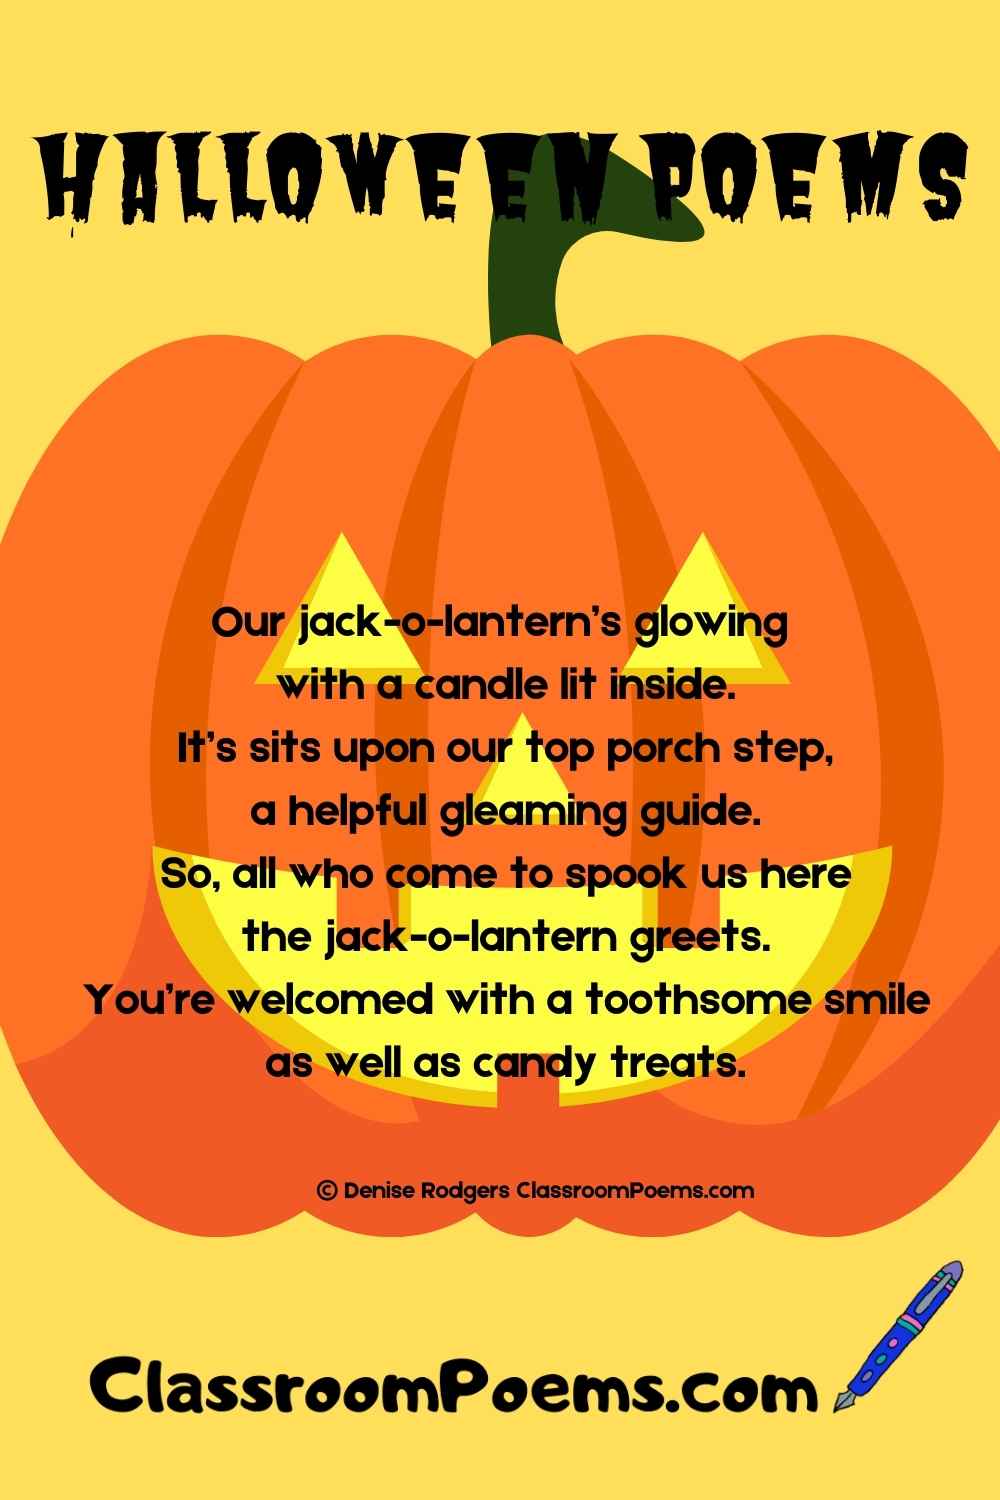 Halloween Poems for kids by Denise Rodgers on ClassroomPoems.com.